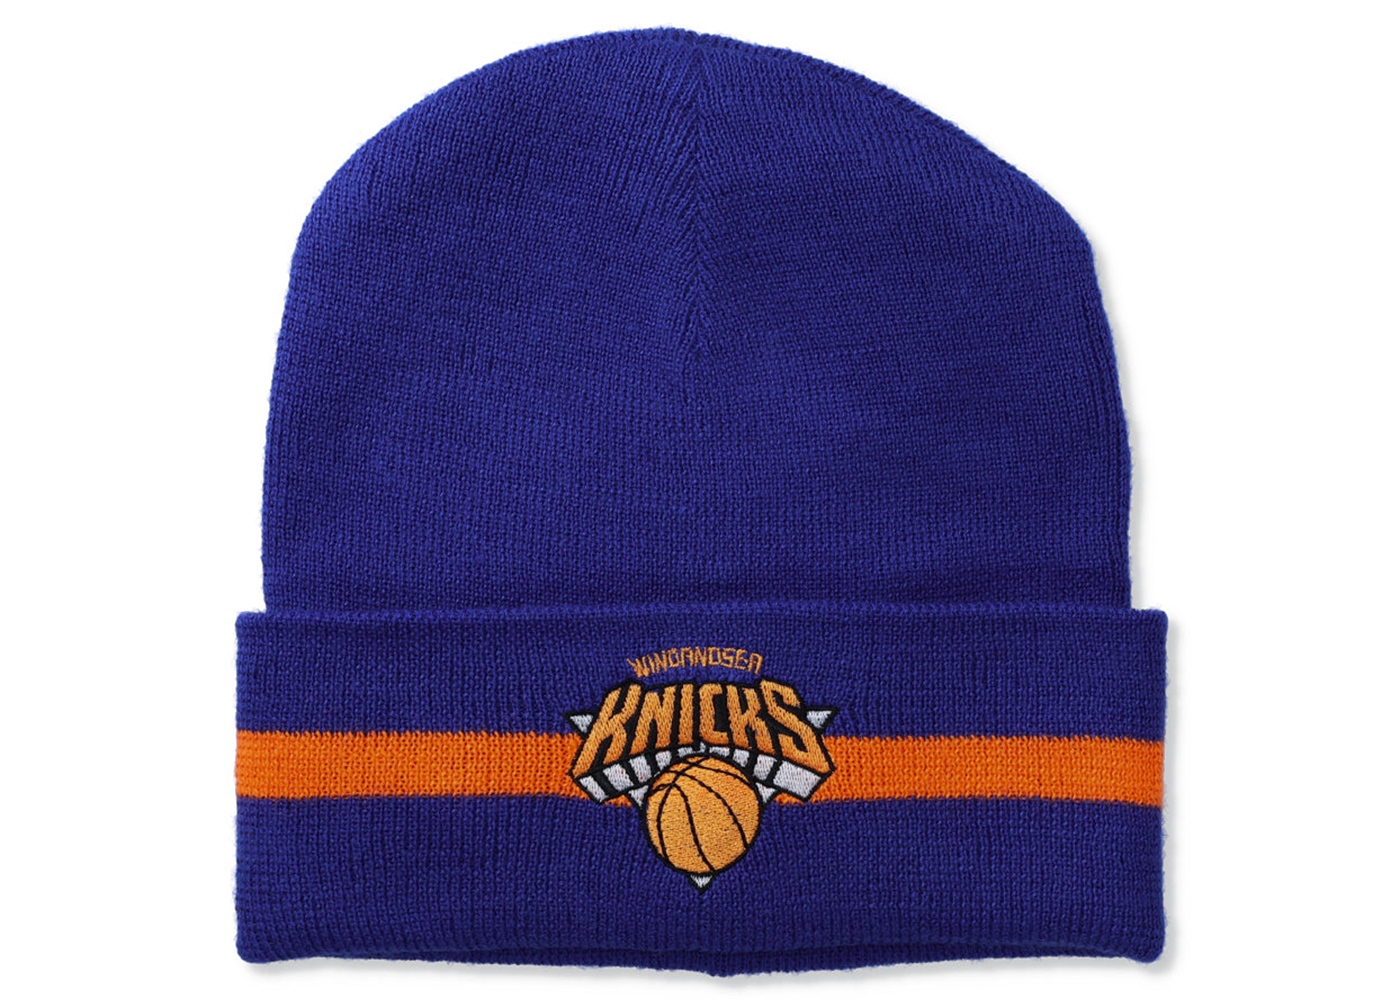 Wind and Sea NBA Cotton Knit Beanie New York Knicks Men's - SS23 - US